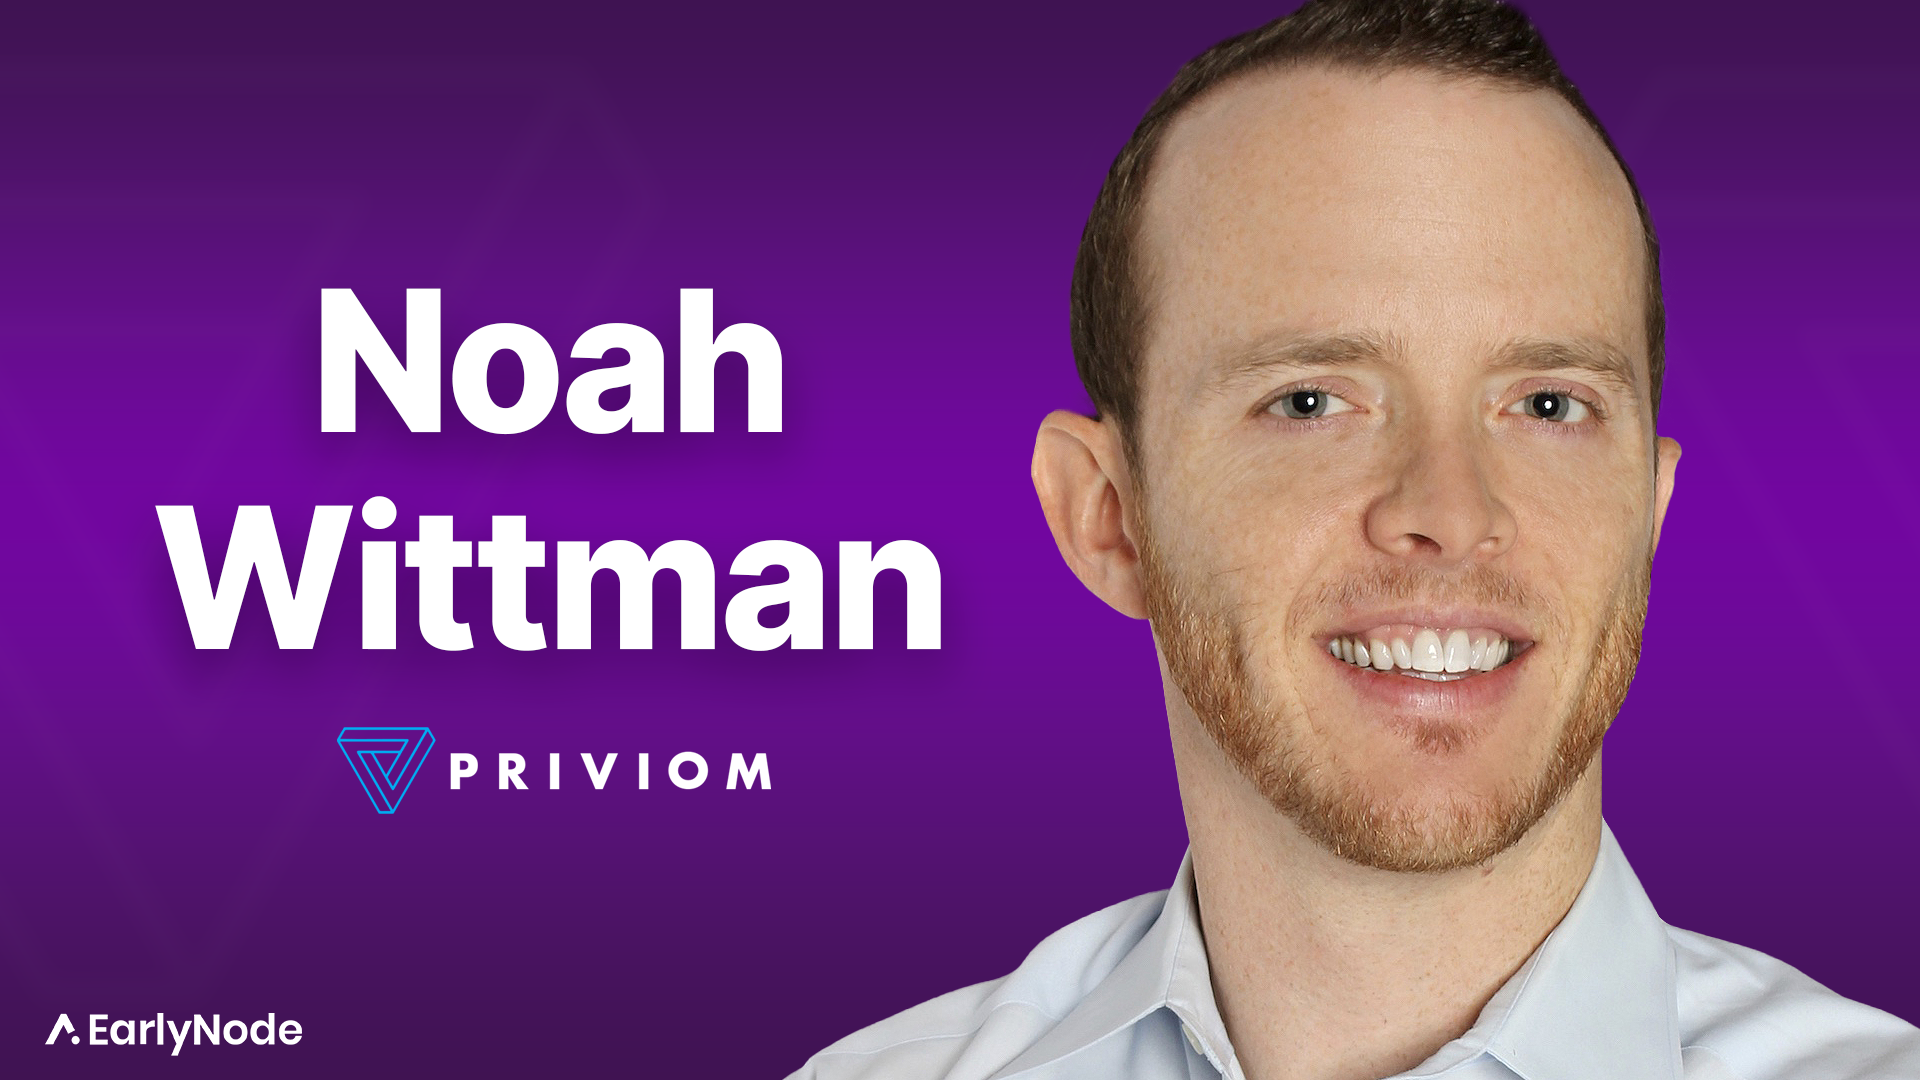 Helping startups spend wisely with Noah Wittman, Founder of Priviom